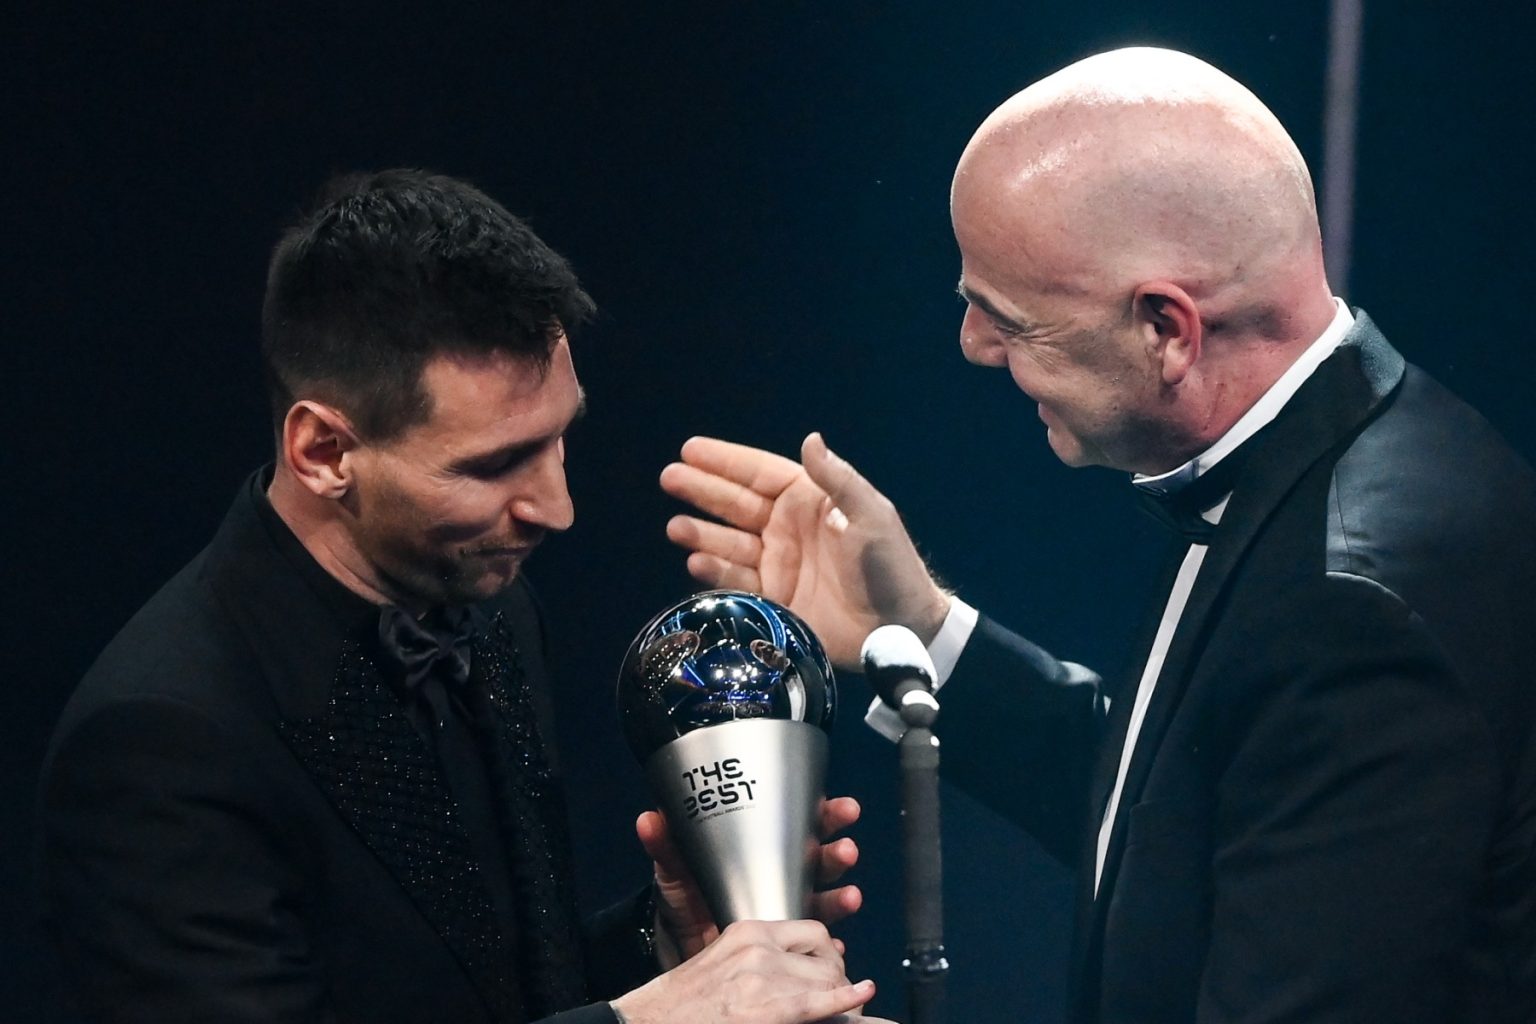 Again, Messi is world’s best as Argentina clears FIFA Awards